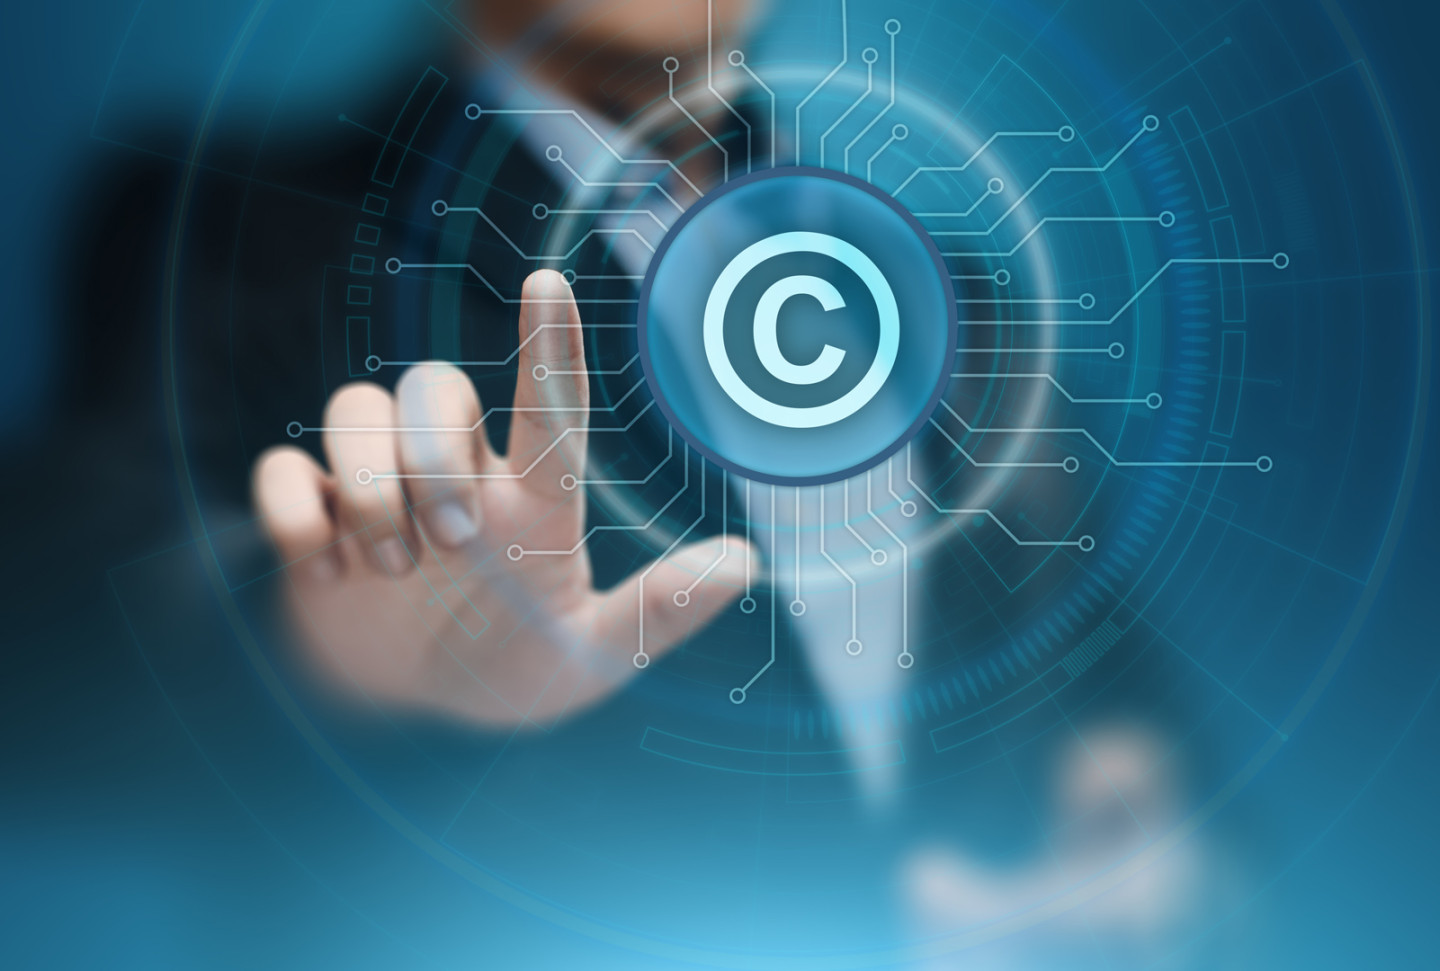 Patent Law Copyright Intellectual Property Business Internet Tec